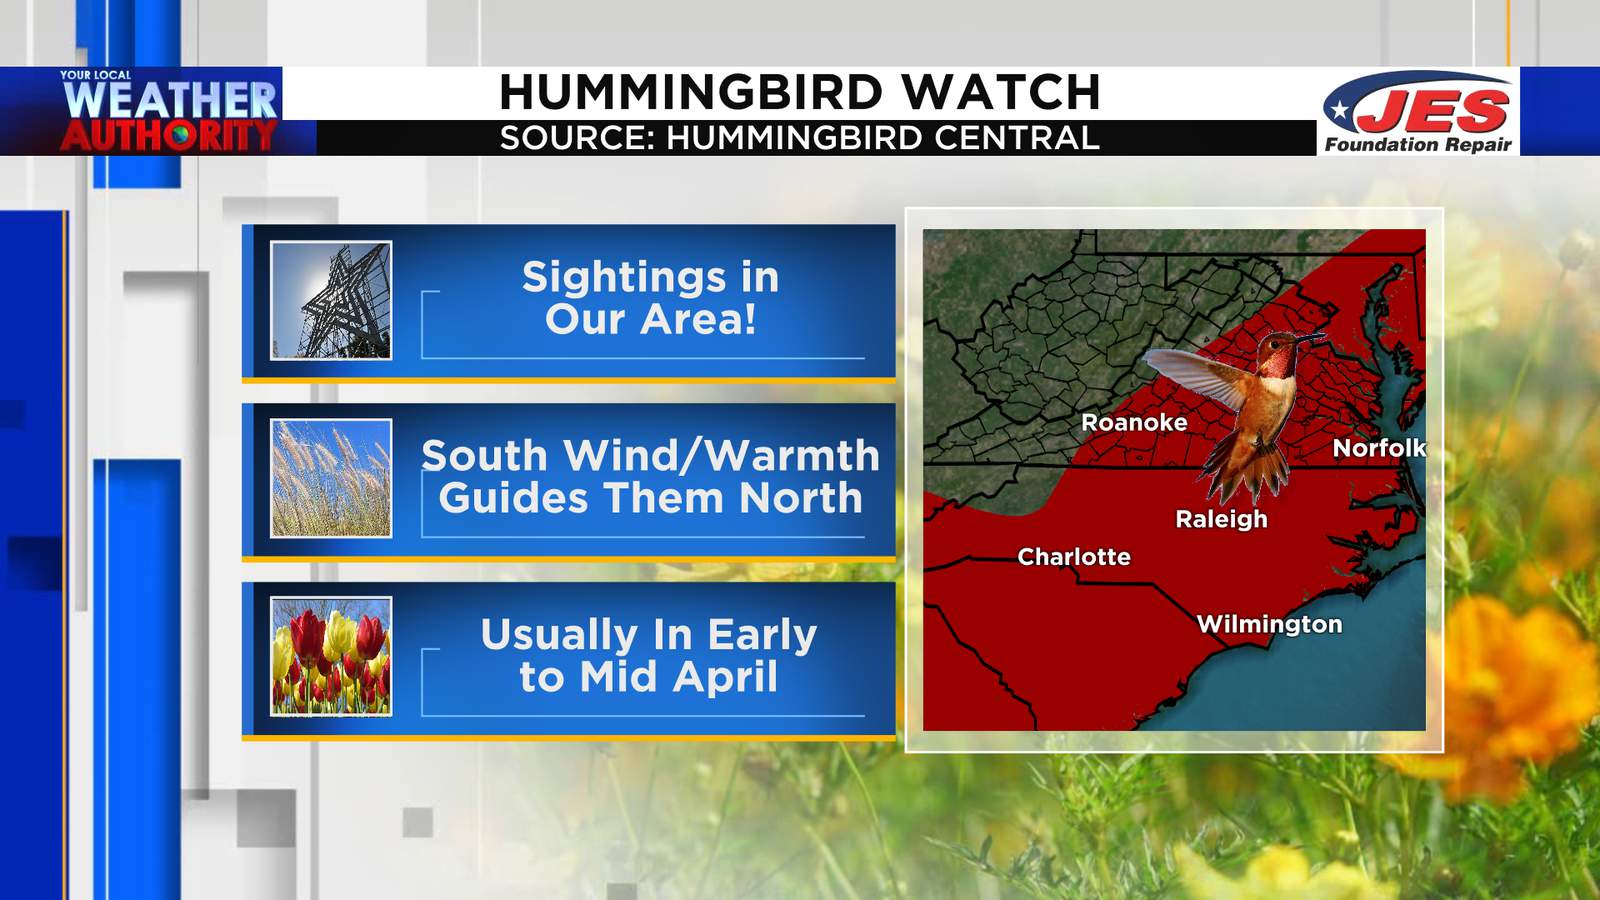 Hummingbird watch! When you could see them in your backyard this spring